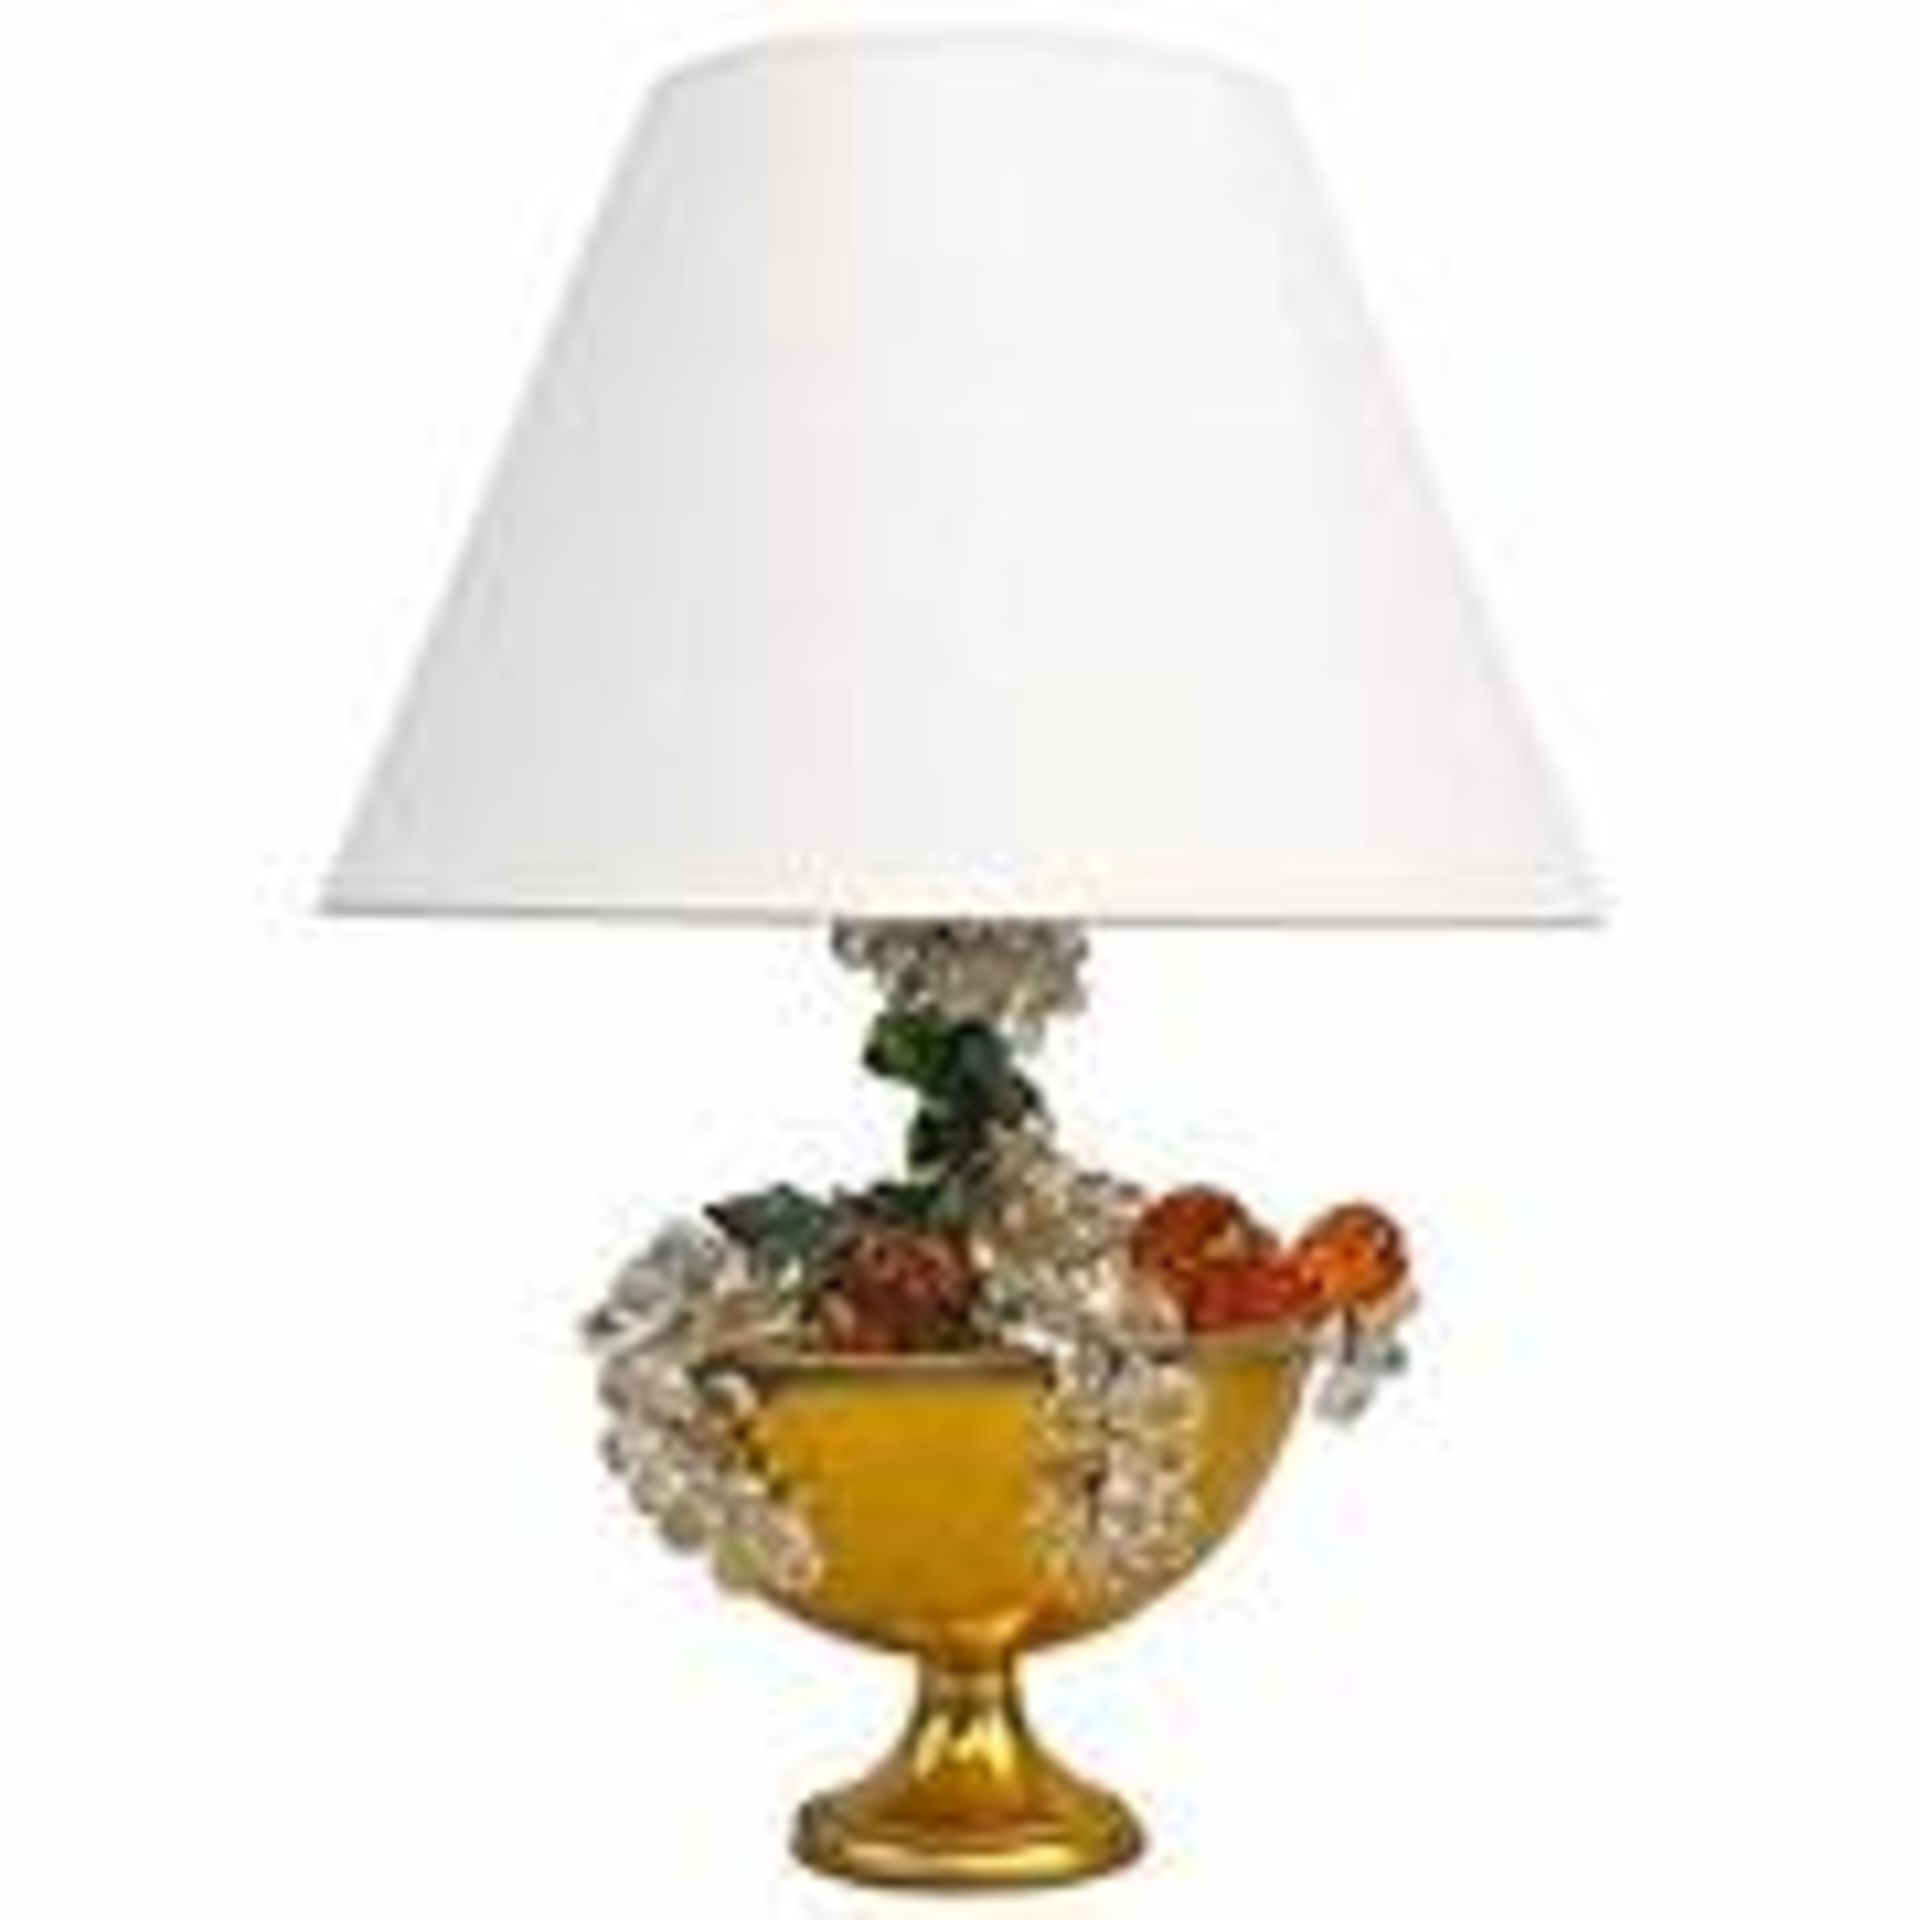 Brass Table Lamp with Glass Fruit Decoration, Mid-20th Century (Apt 1) - Image 4 of 6